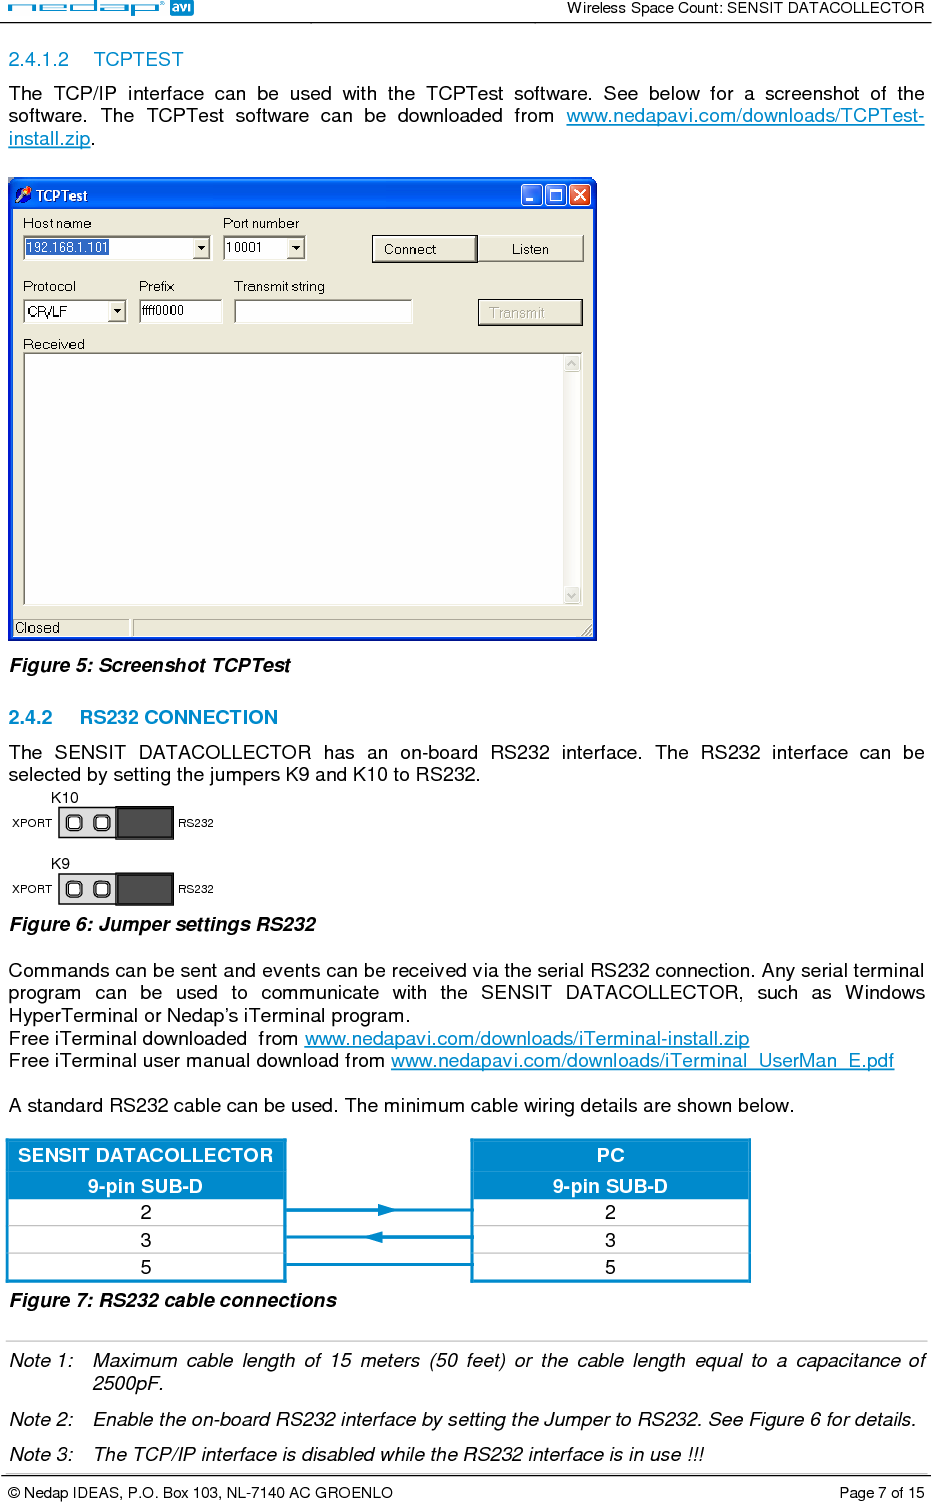   Wireless Space Count: SENSIT DATACOLLECTOR  © Nedap IDEAS, P.O. Box 103, NL-7140 AC GROENLO  Page 7 of 15  2.4.1.2  TCPTEST The  TCP/IP  interface  can  be  used  with  the  TCPTest  software.  See  below  for  a  screenshot  of  the software.  The  TCPTest  software  can  be  downloaded  from  www.nedapavi.com/downloads/TCPTest-install.zip.   Figure 5: Screenshot TCPTest  2.4.2  RS232 CONNECTION The  SENSIT  DATACOLLECTOR  has  an  on-board  RS232  interface.  The  RS232  interface  can  be selected by setting the jumpers K9 and K10 to RS232.  K10 K9 XPORT XPORT RS232 RS232  Figure 6: Jumper settings RS232   Commands can be sent and events can be received via the serial RS232 connection. Any serial terminal program  can  be  used  to  communicate  with  the  SENSIT  DATACOLLECTOR,  such  as  Windows HyperTerminal or Nedap’s iTerminal program. Free iTerminal downloaded  from www.nedapavi.com/downloads/iTerminal-install.zip Free iTerminal user manual download from www.nedapavi.com/downloads/iTerminal_UserMan_E.pdf  A standard RS232 cable can be used. The minimum cable wiring details are shown below.  SENSIT DATACOLLECTOR  PC 9-pin SUB-D   9-pin SUB-D 2   2 3   3 5   5 Figure 7: RS232 cable connections  Note 1:  Maximum  cable  length  of  15  meters  (50  feet)  or  the  cable  length  equal  to  a  capacitance  of 2500pF. Note 2:  Enable the on-board RS232 interface by setting the Jumper to RS232. See Figure 6 for details. Note 3:  The TCP/IP interface is disabled while the RS232 interface is in use !!! 